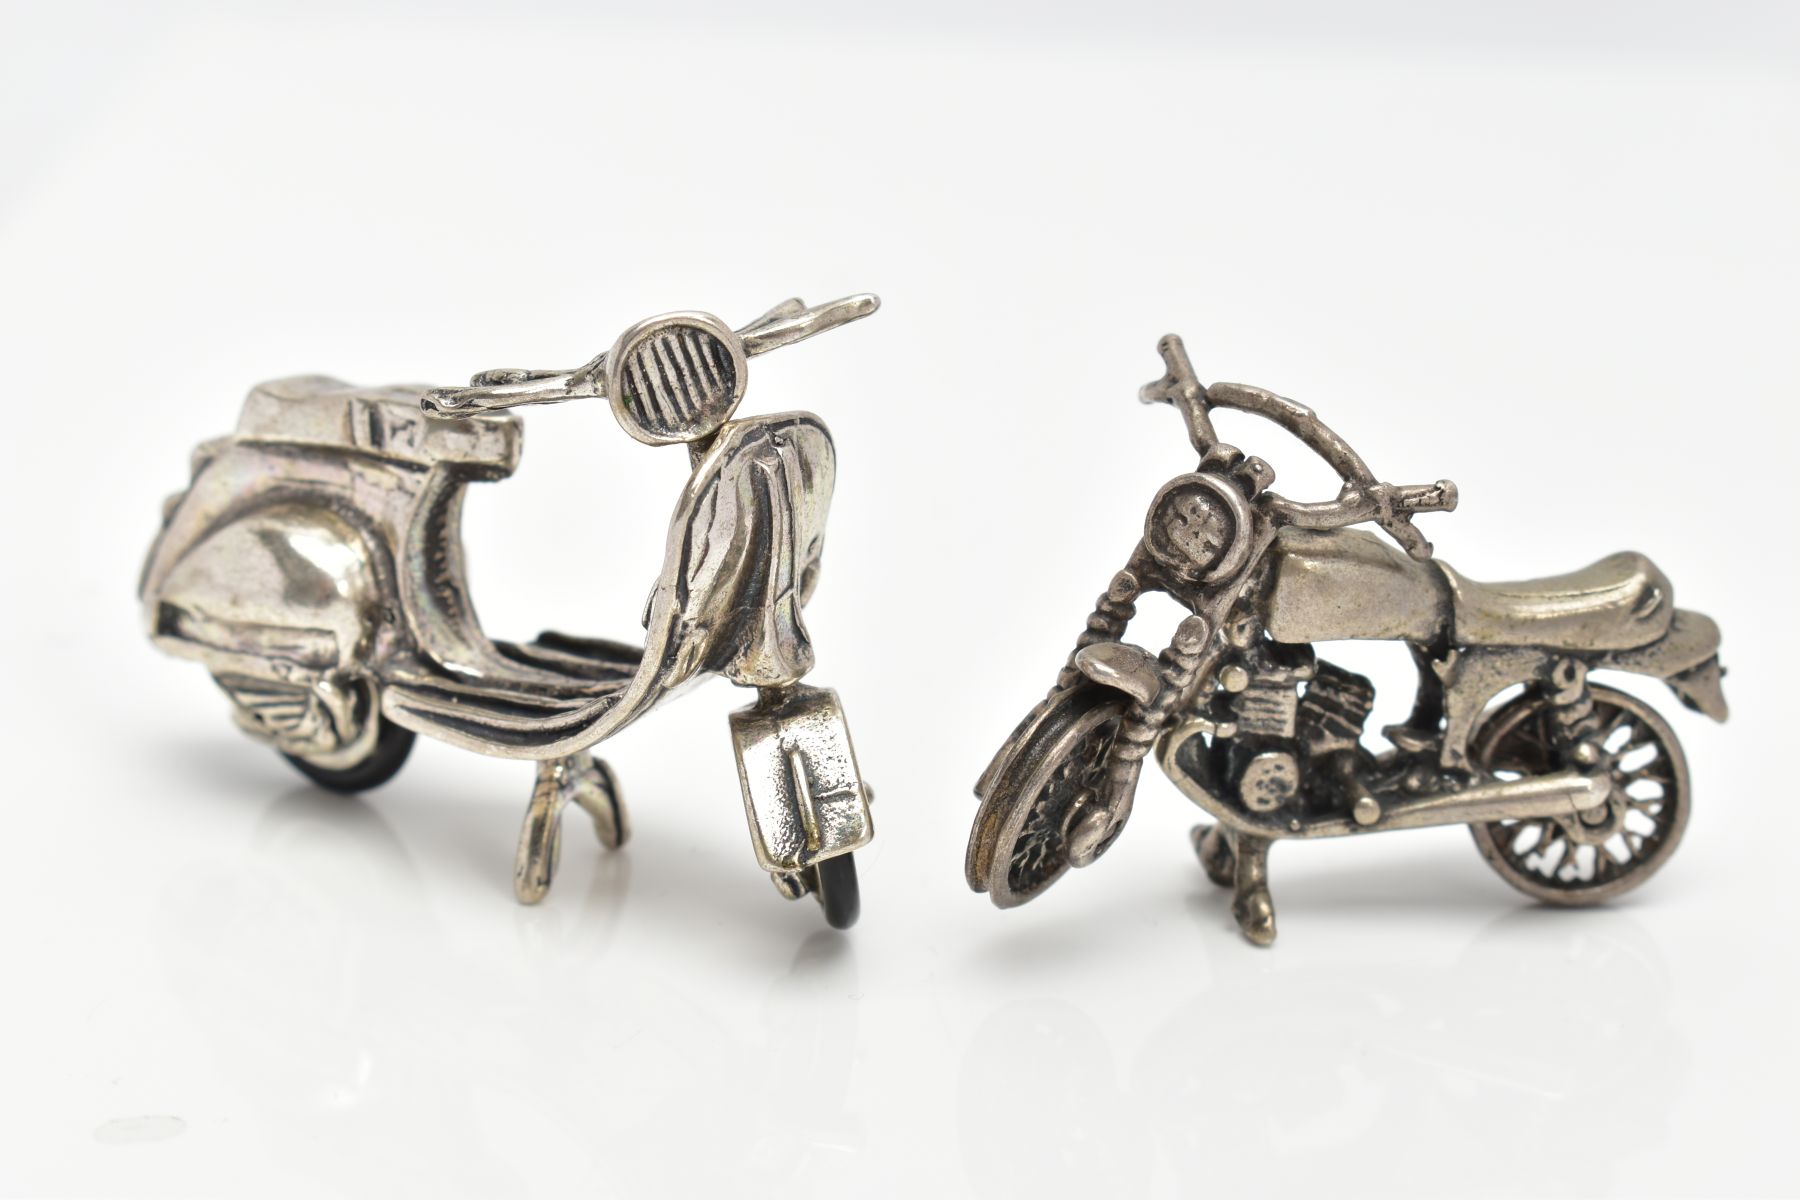 TWO WHITE METAL MINIATURE MOTORCYCLE FIGURINES, one with very rubbed stamps, the other unmarked